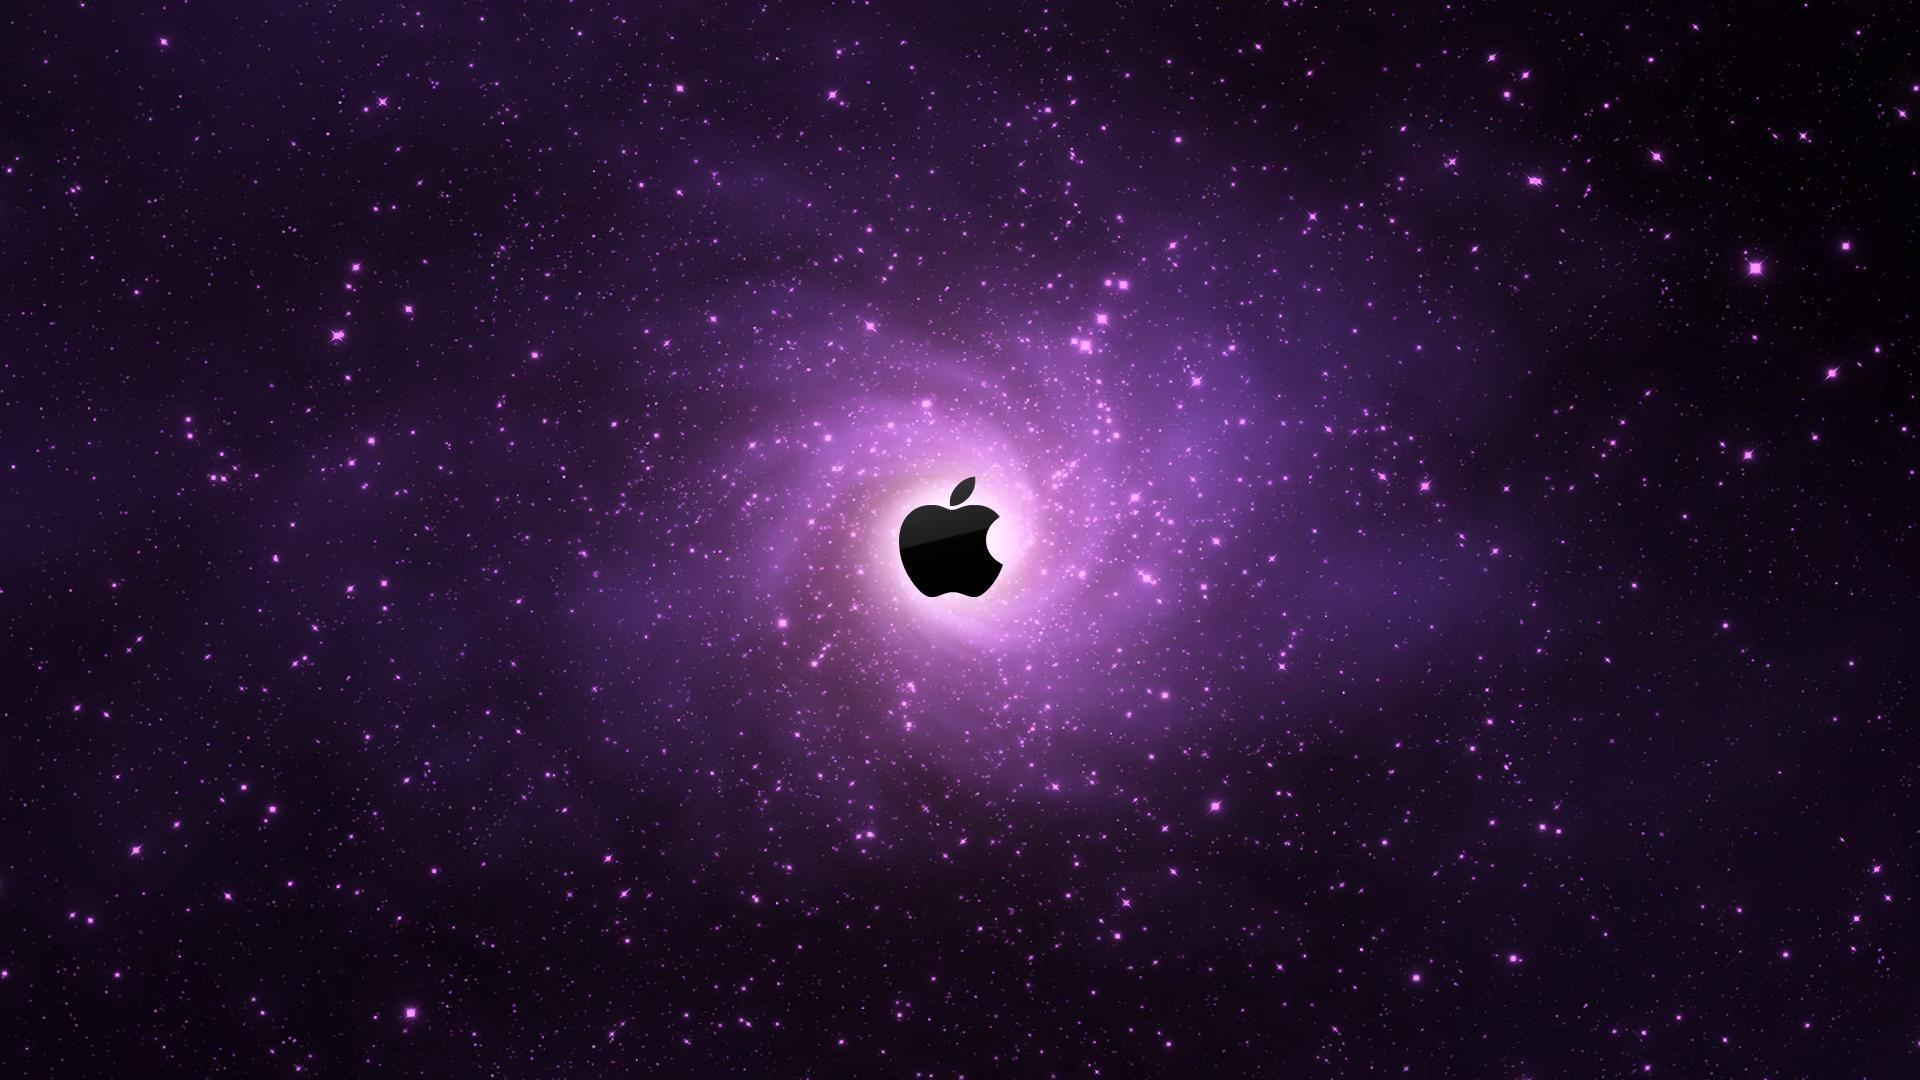 Awesome! Beautiful HD Wallpaper for Apple Laptop Users